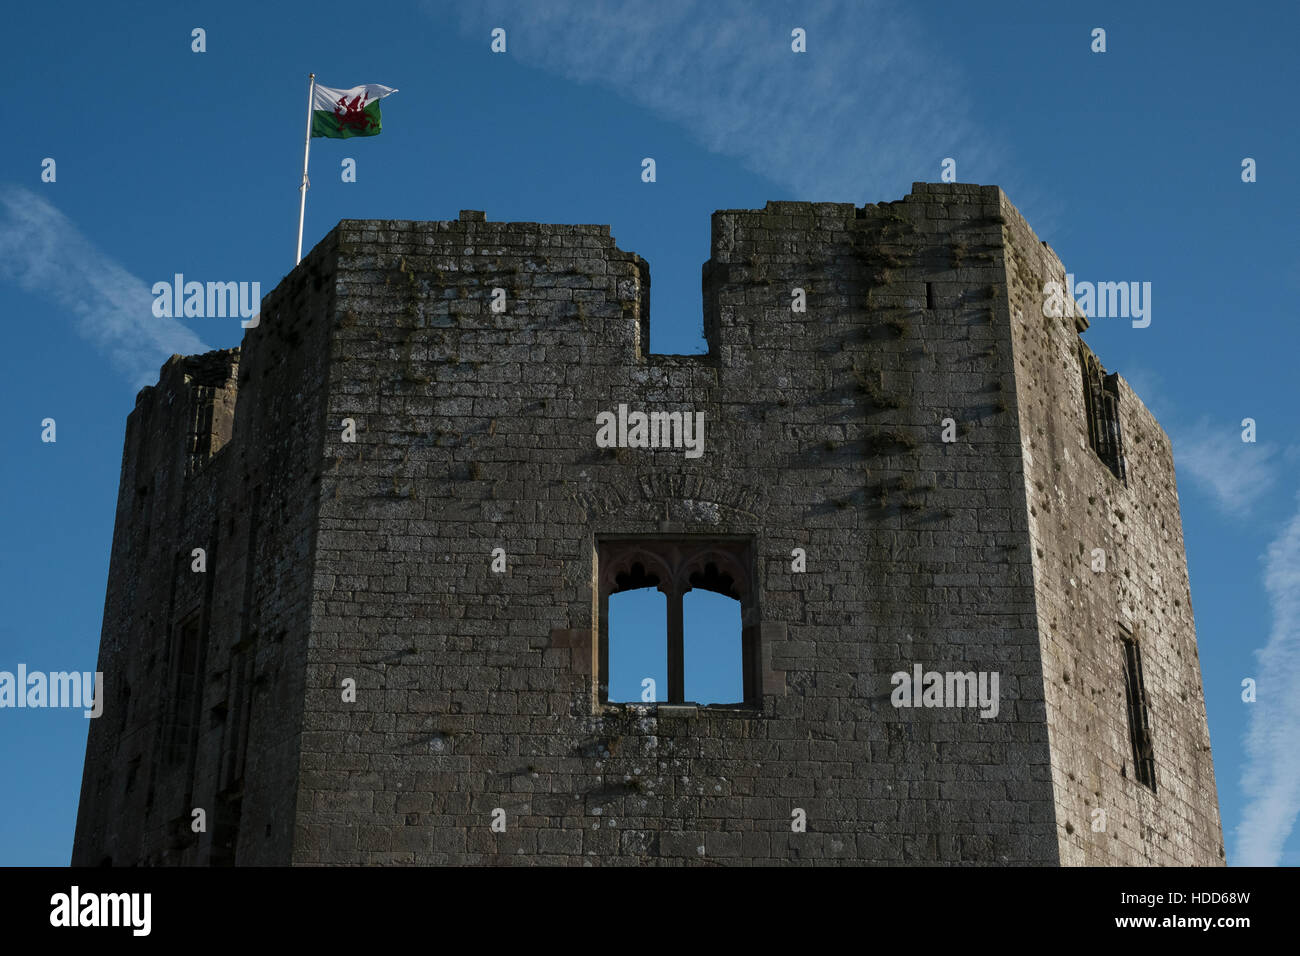 Welsh flag flying above stone castle tower, Wye Valley Stock Photo